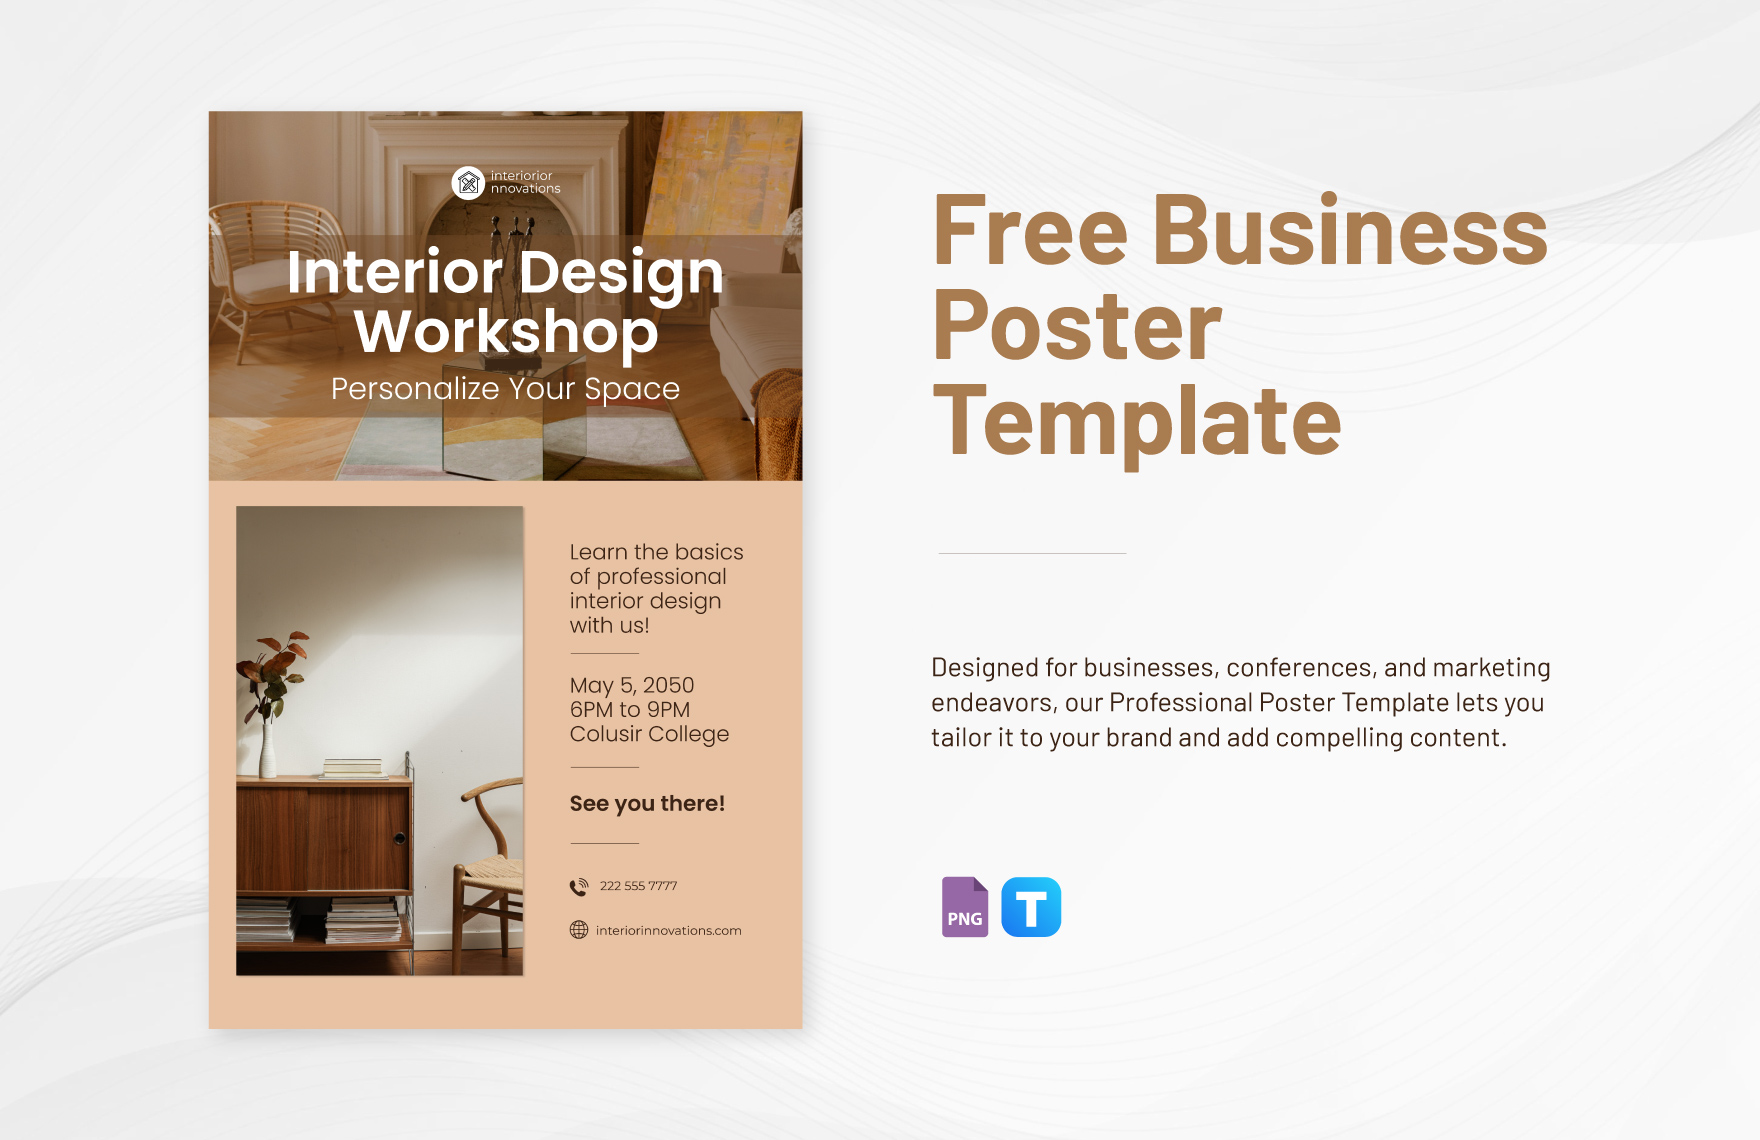 Professional Poster Template in PNG